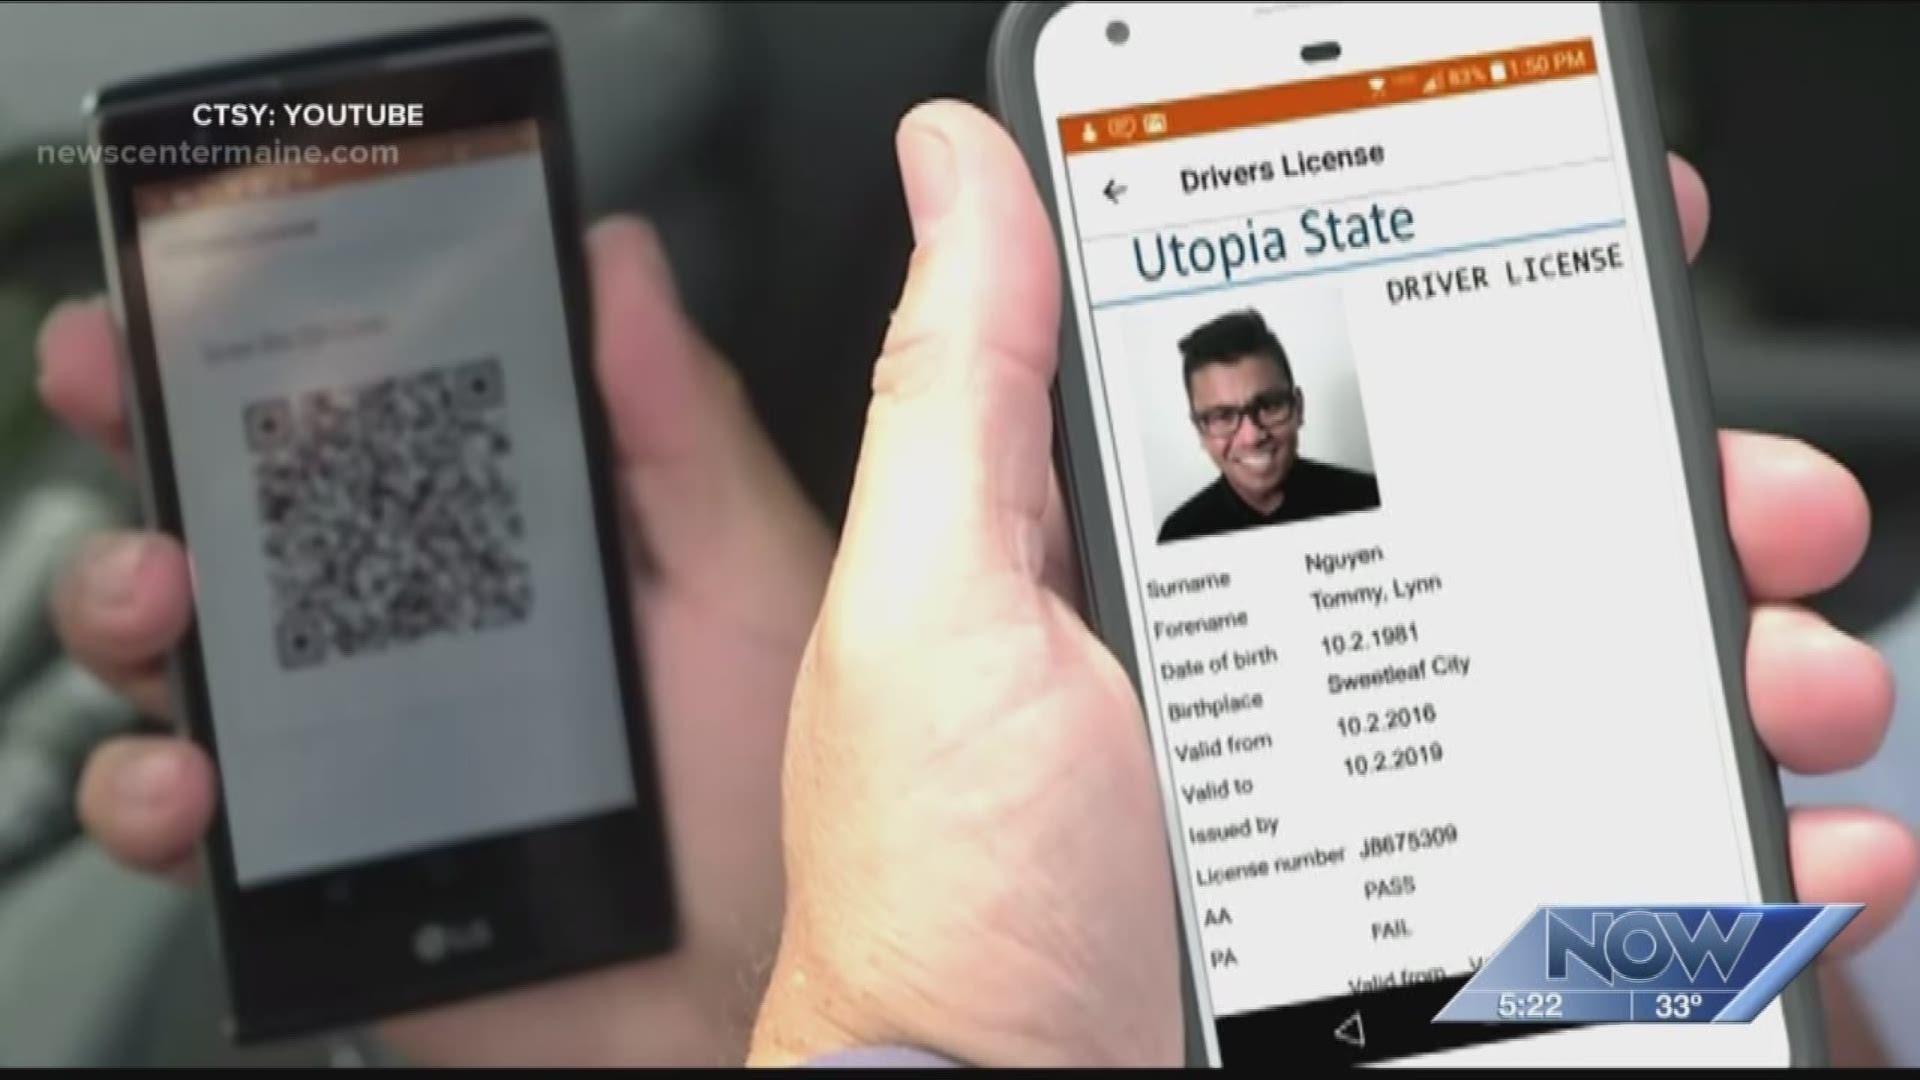 Mobile app drivers licenses...maybe